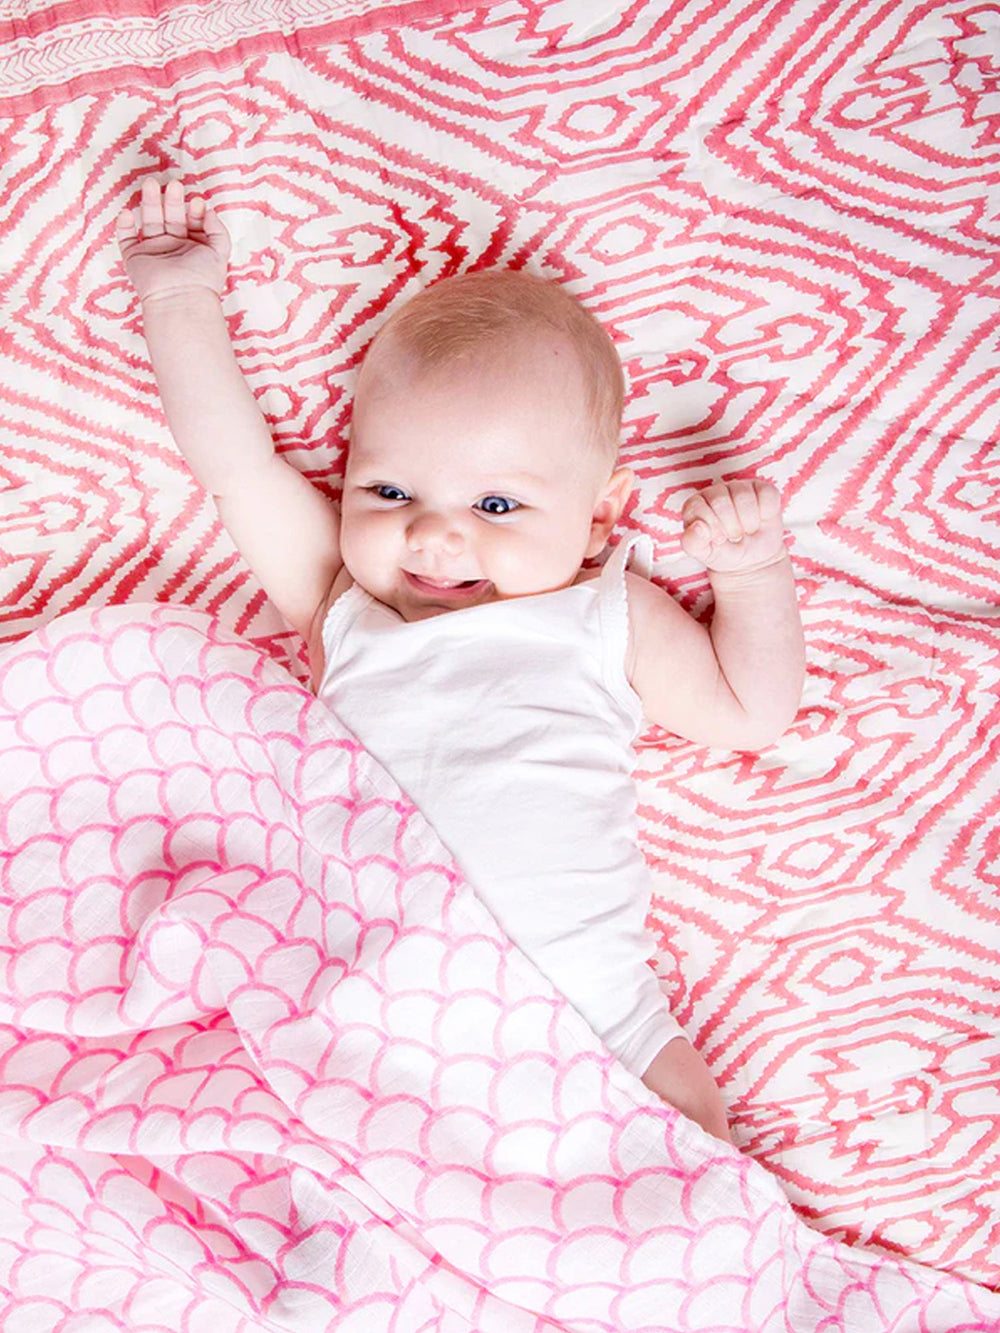 Block Printed Cotton Baby Quilt - Southside Pink Print